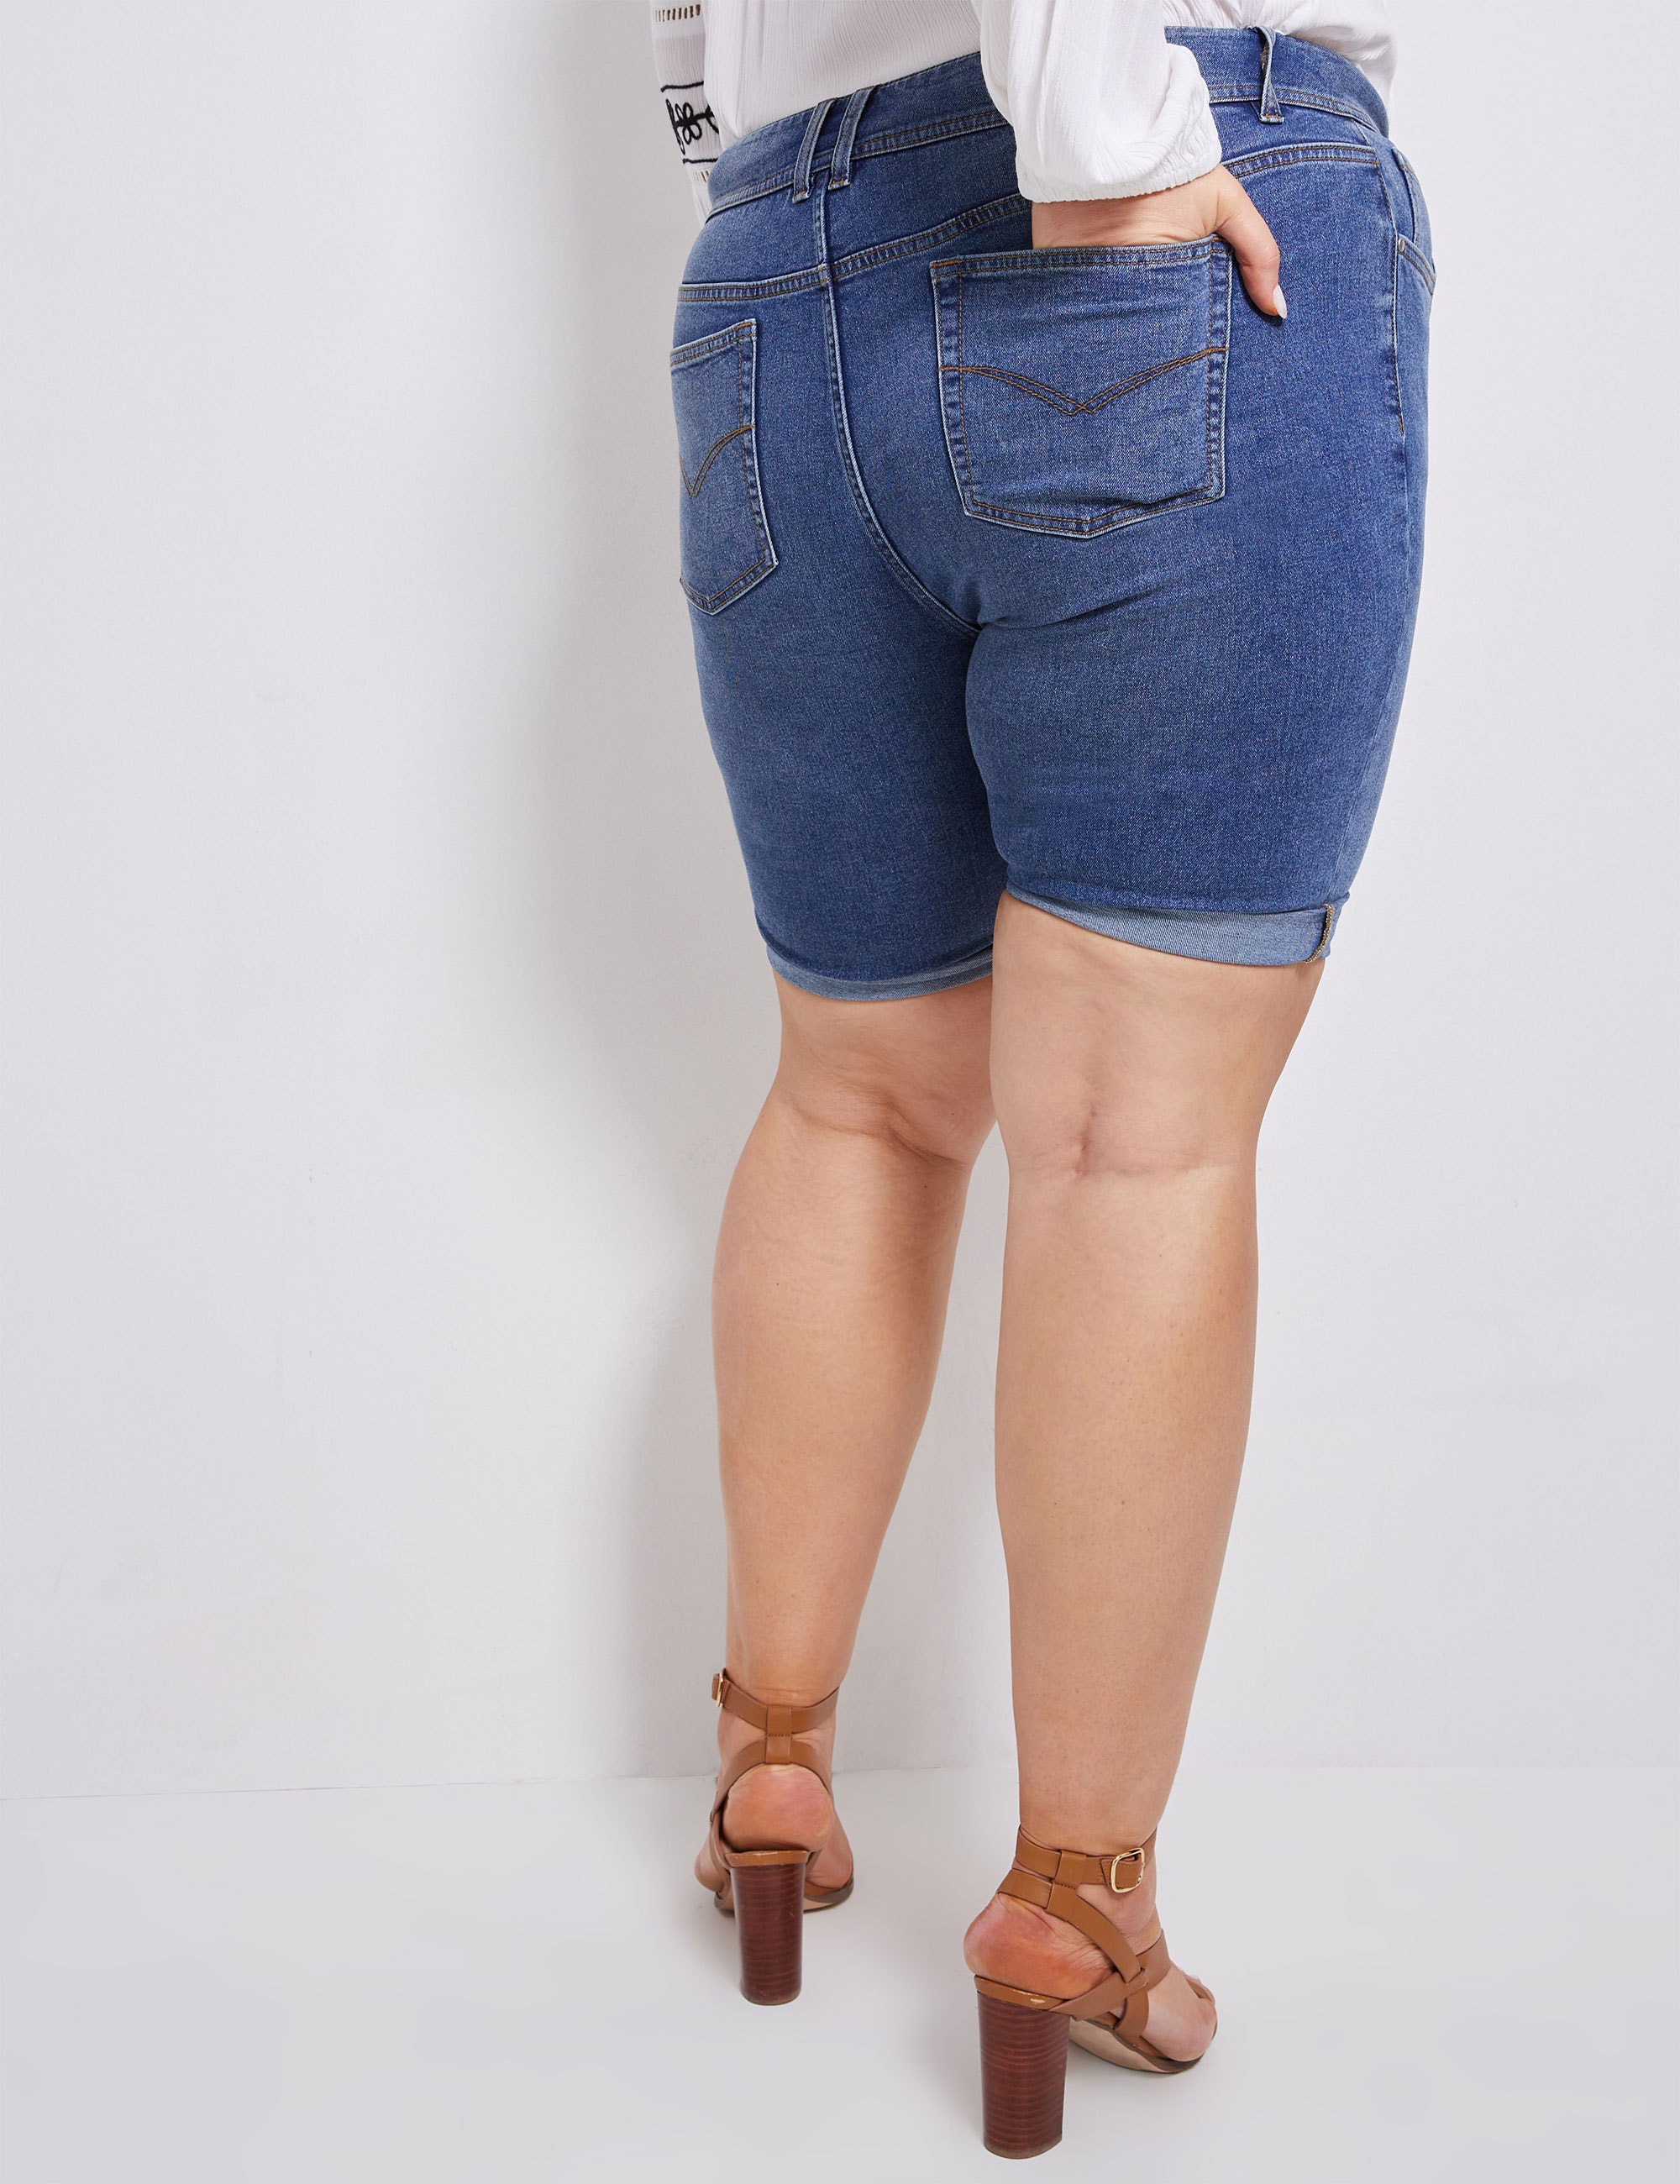 Summer Blue Ripped Jeans Shorts Womens For Women Plus Size S 3X, Trendy And  Casual With Rippled Detailing, Straight Leg Bell Bottoms, And Black Color  Fast DHL Shipping 4970 From Sell_clothing, $13.48